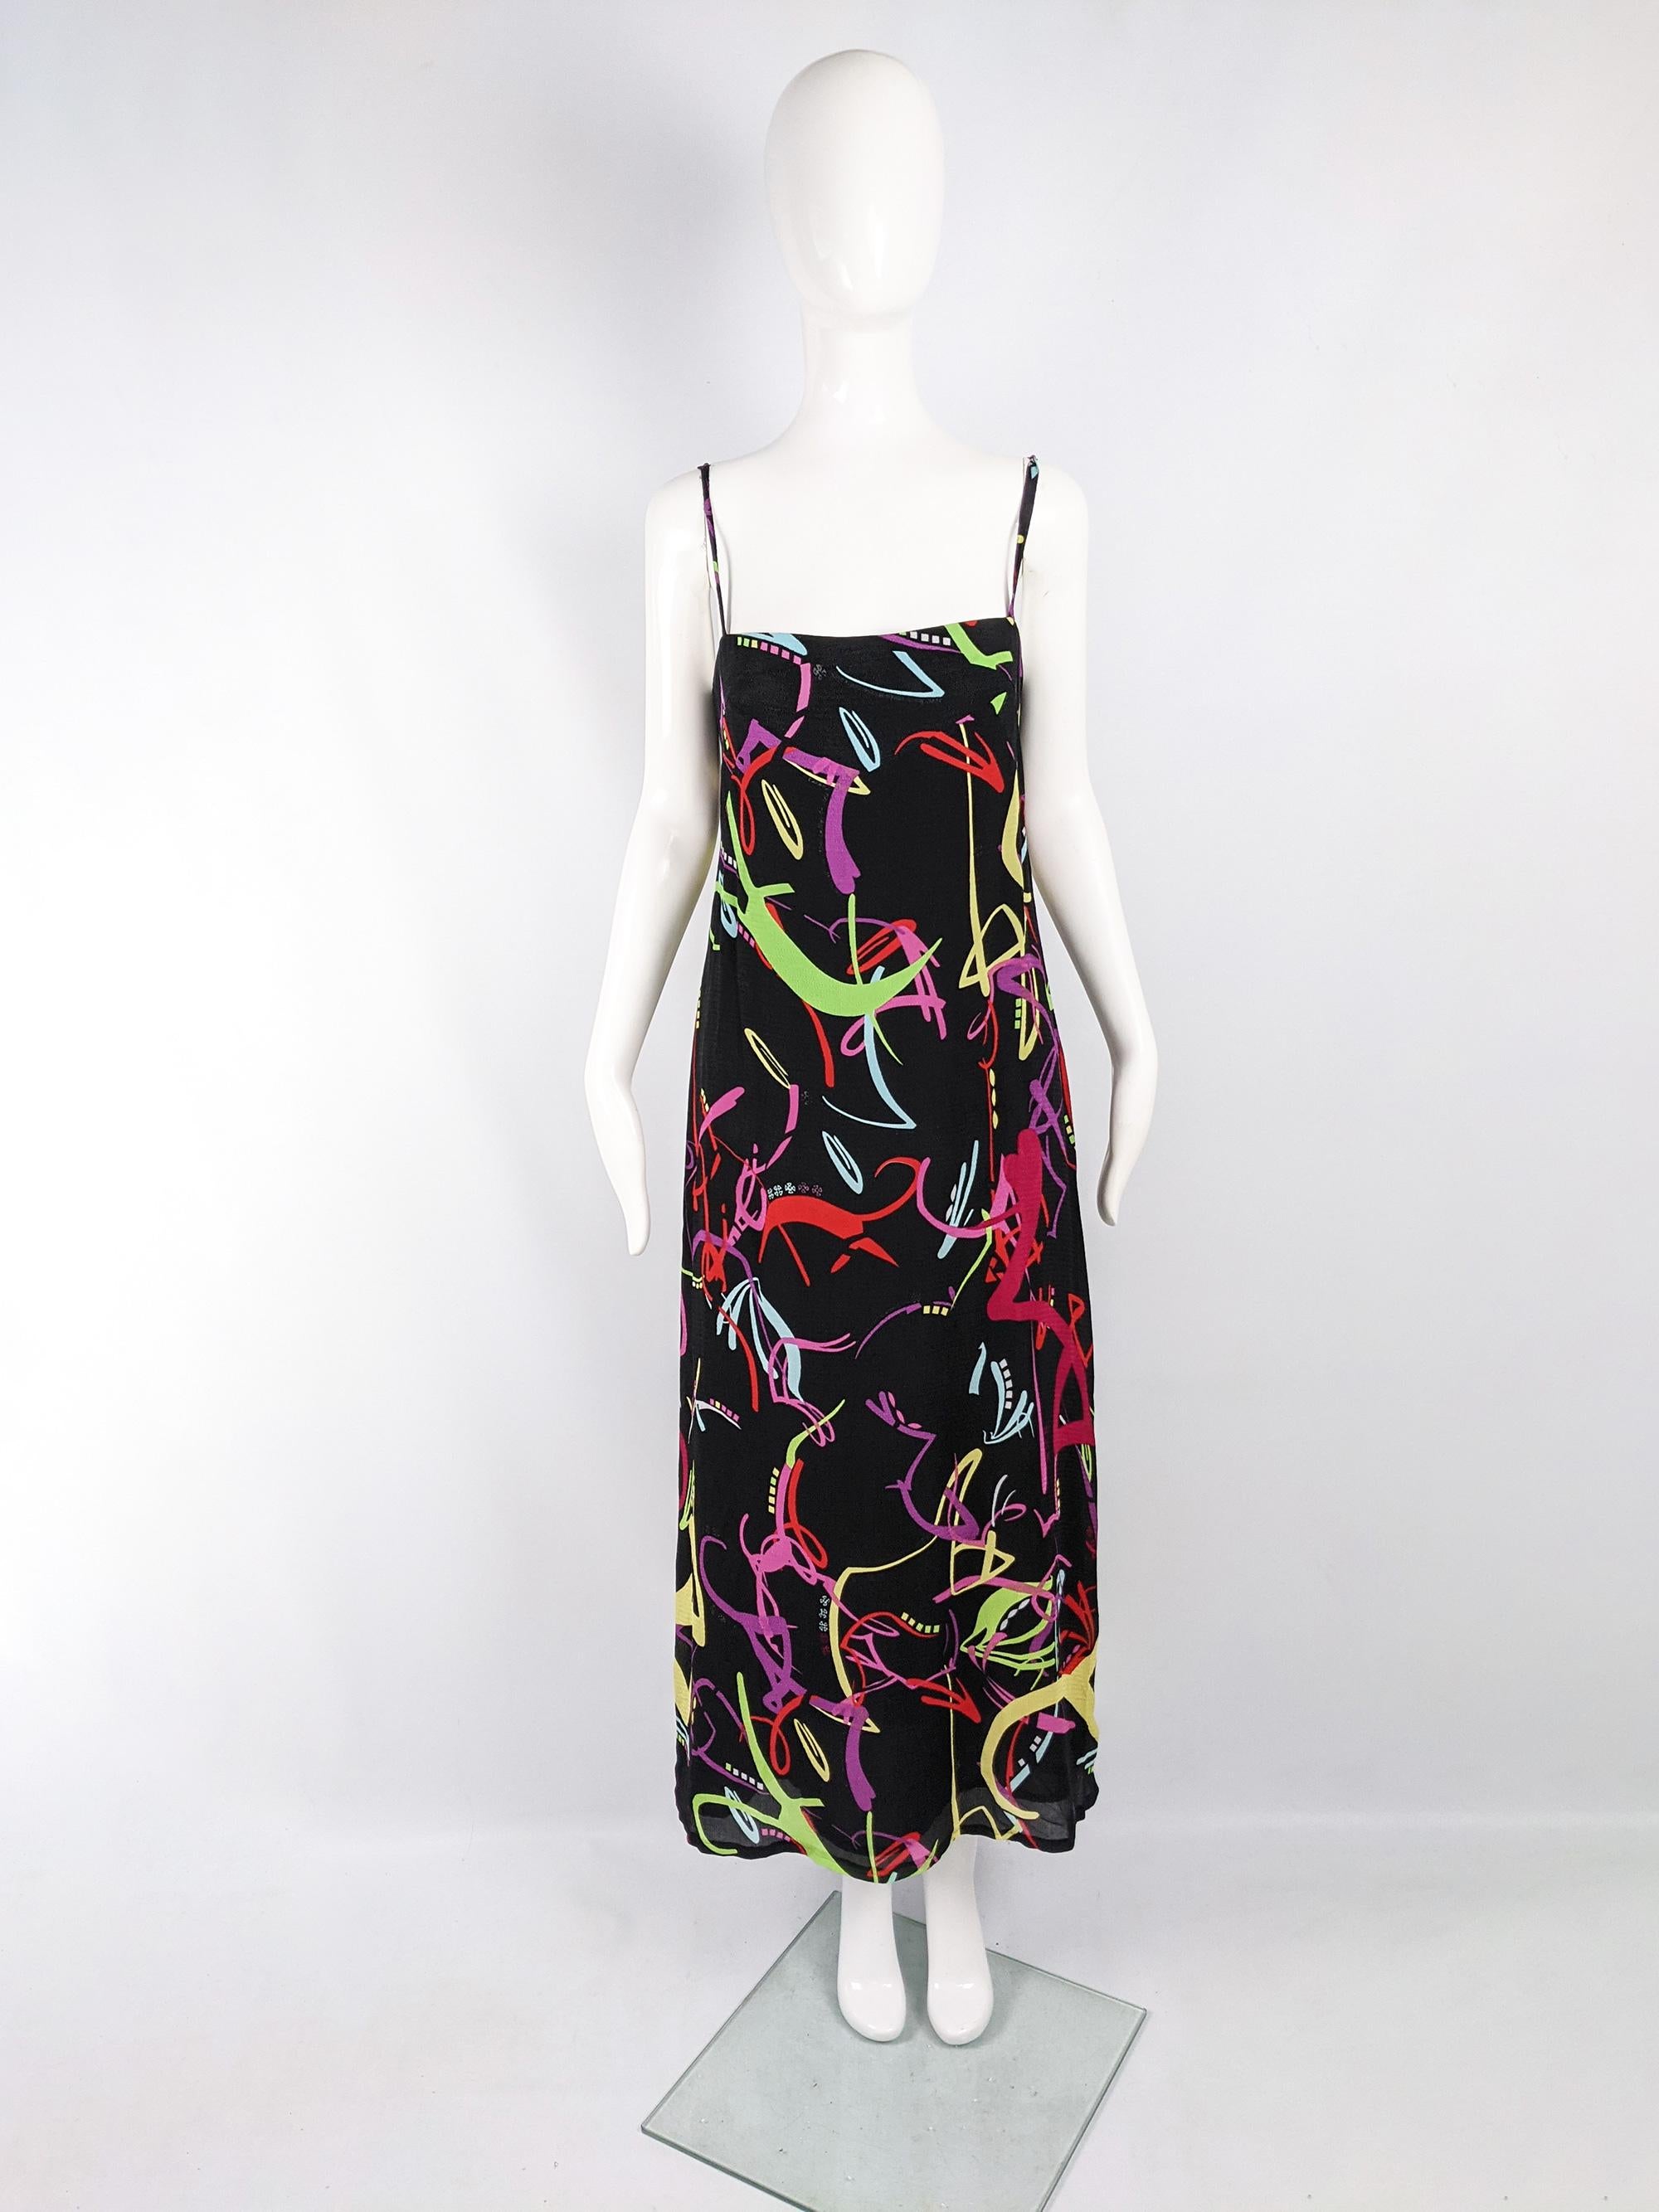 A fabulous vintage womens slip dress from the 90s by luxury French fashion designer, Christian Lacroix. In a black viscose and silk fabric which has beautiful drape, with spaghetti straps and a bold multicoloured print. 

Size: Marked vintage 42 but